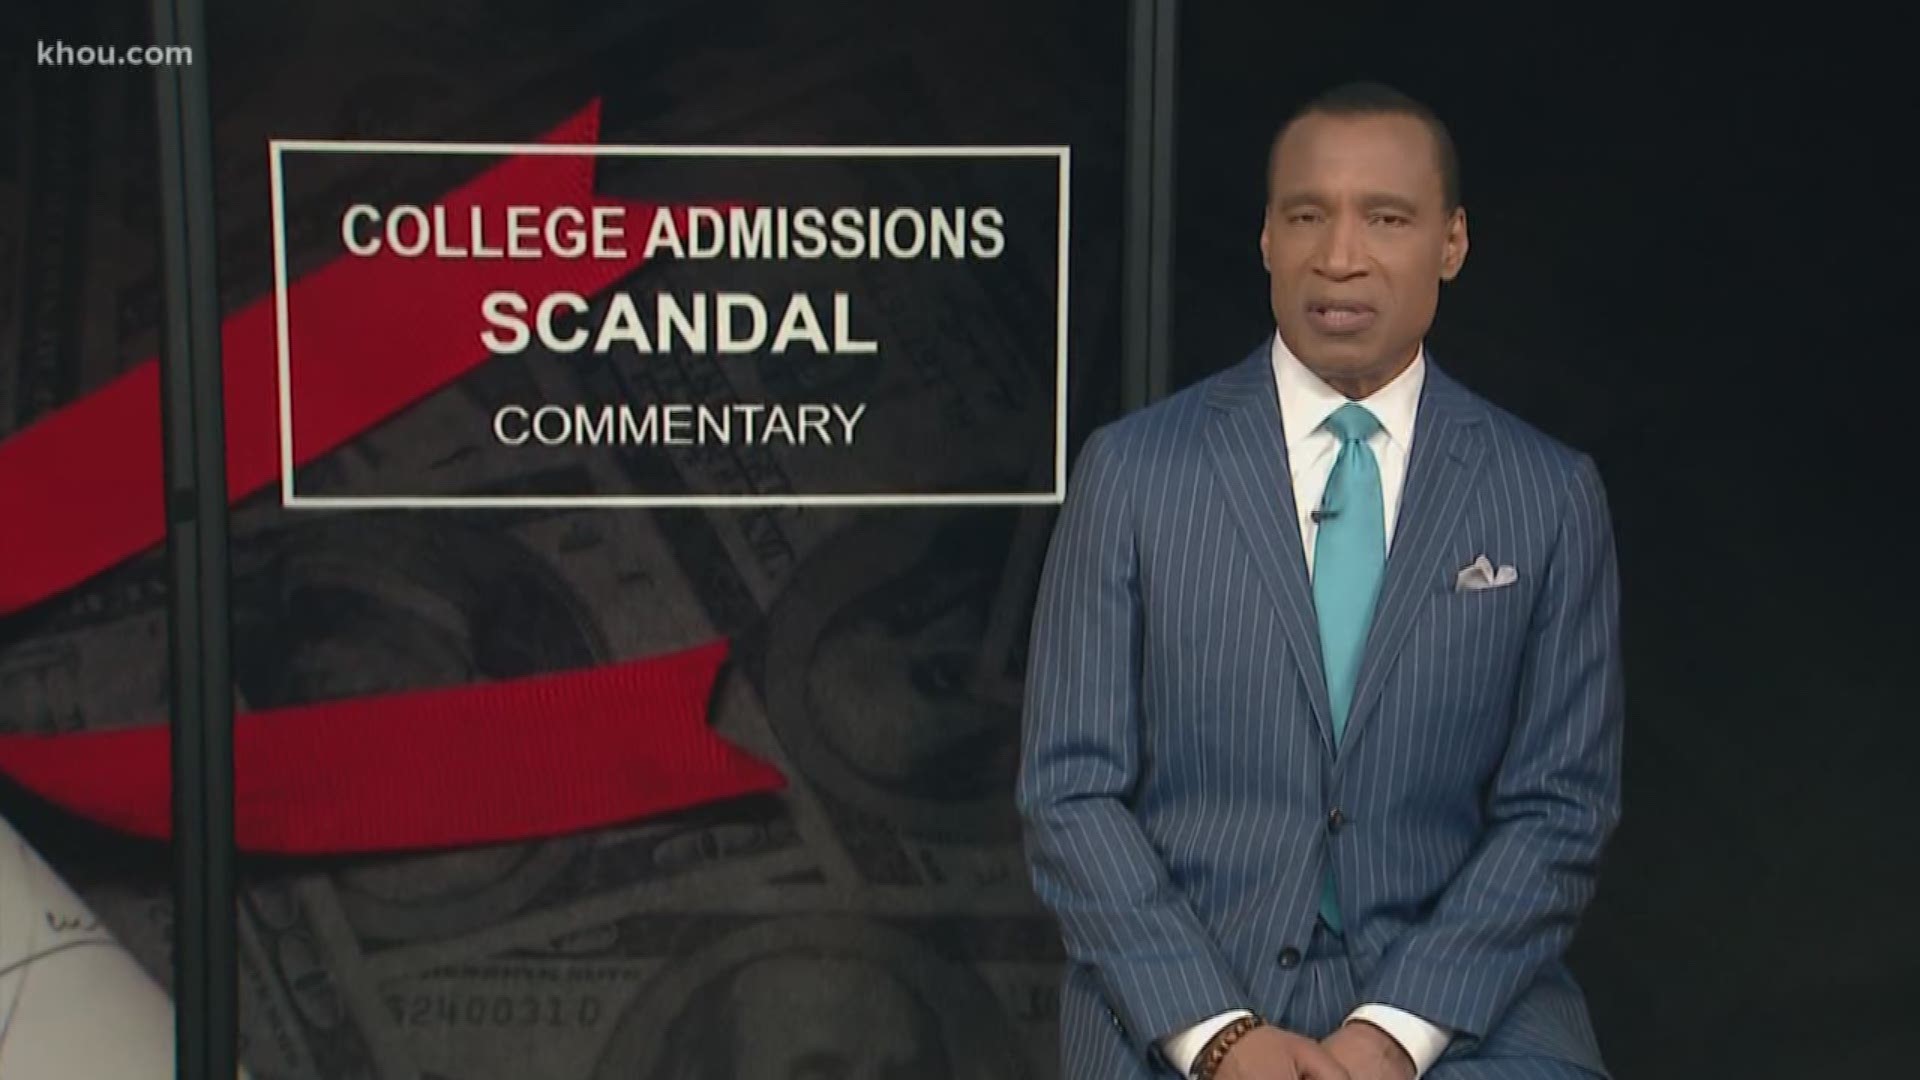 KHOU 11 News anchor Len Cannon shares his thoughts on the college admissions scandal and privilege.